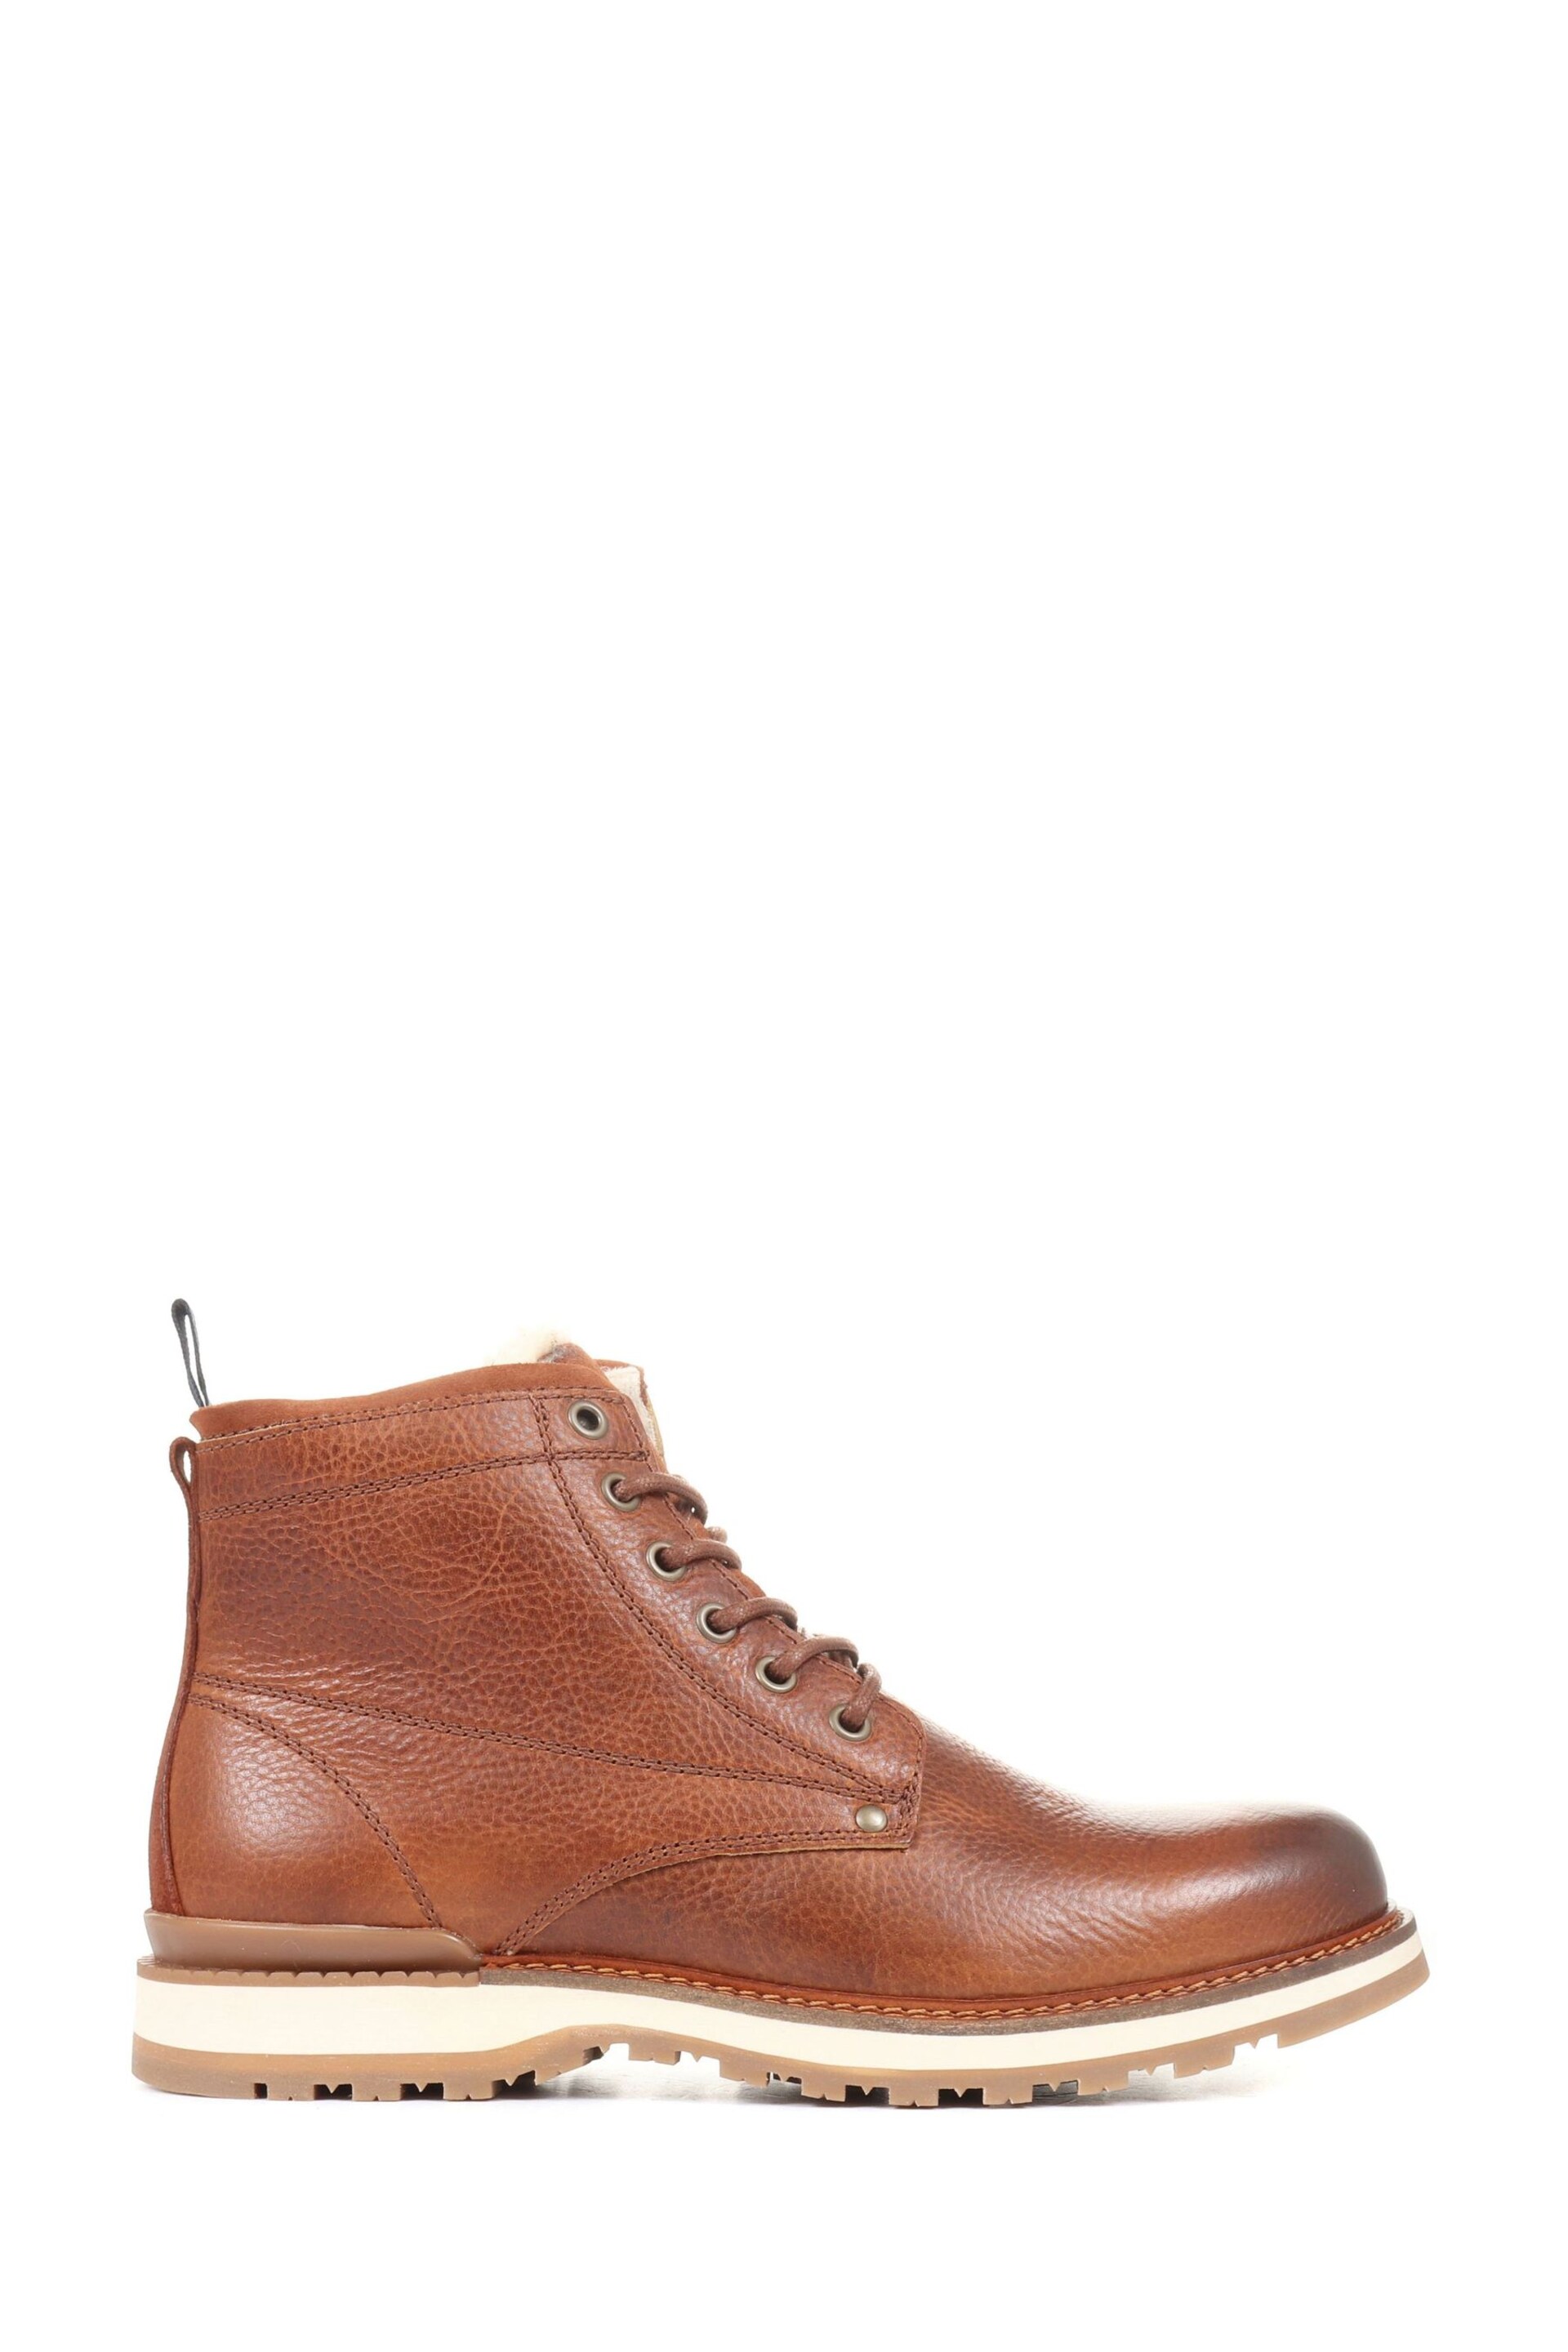 Jones Bootmaker Mens Ealing Leather Ankle Boots - Image 1 of 5